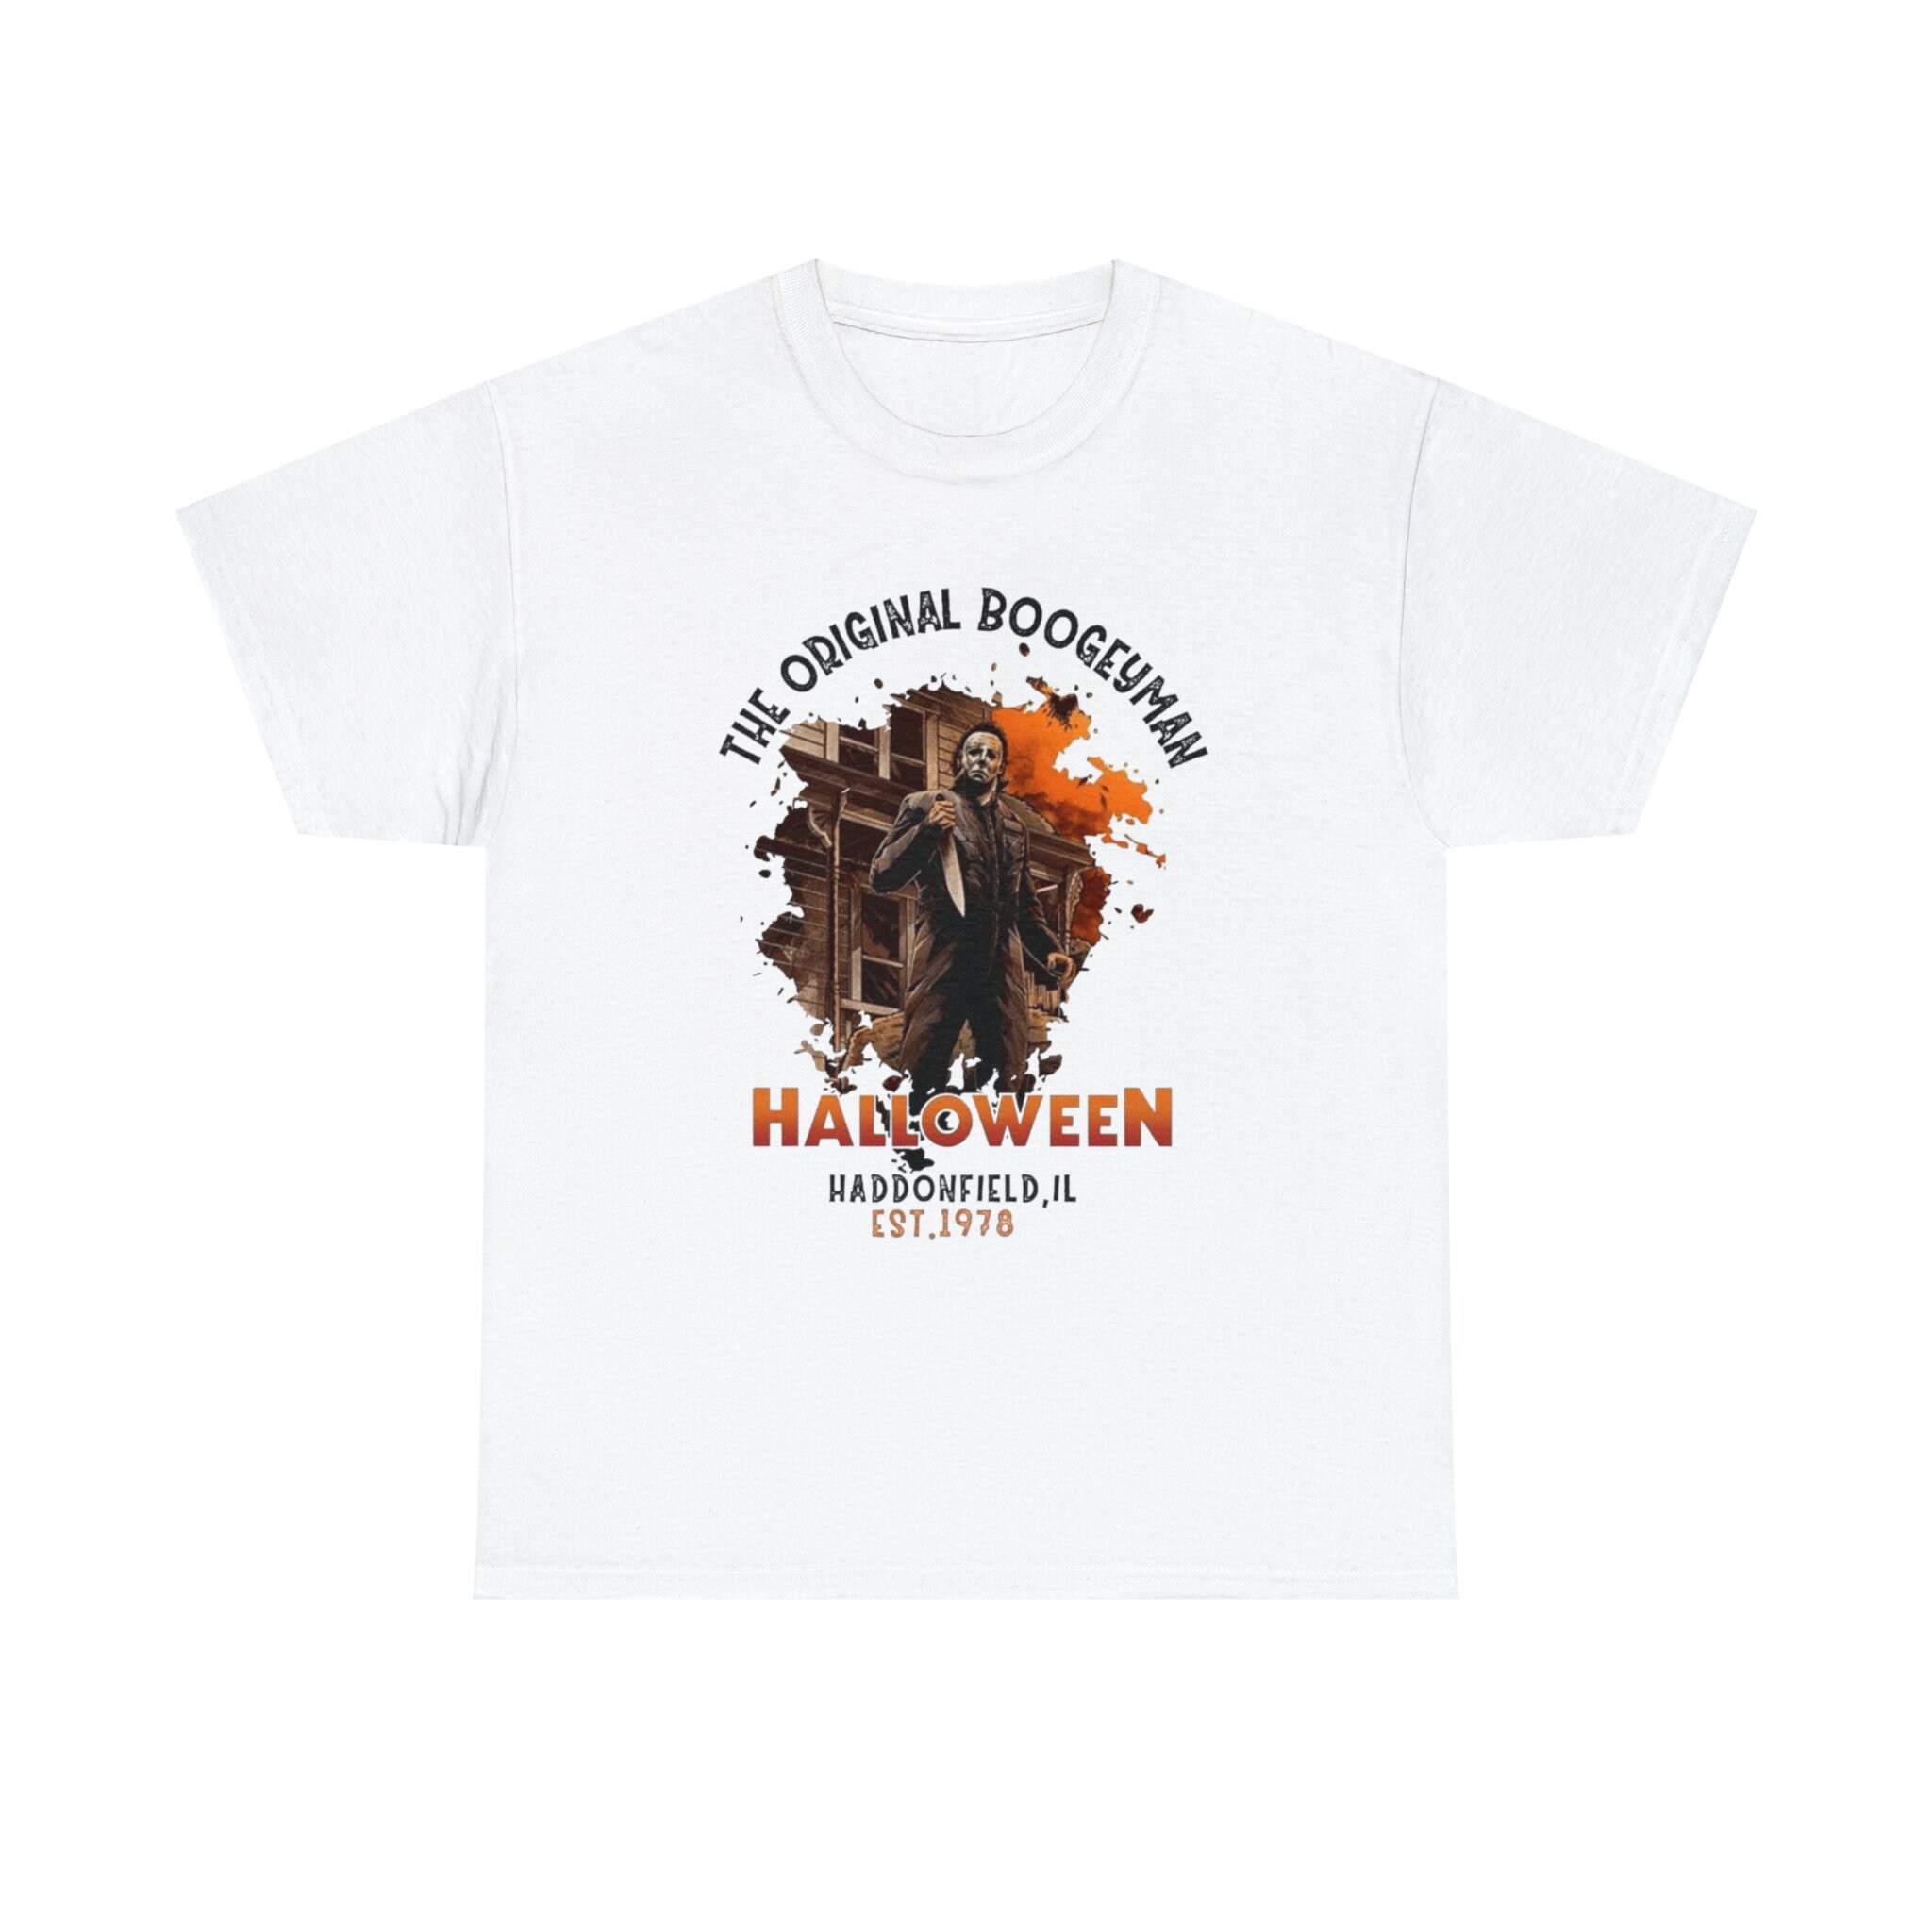 Discover The Original Boogeyman Michael Myers Graphic Tee Get Ready for a Terrifyingly Cool Look: Shop our Horror Movie Graphic Tees Collection Today